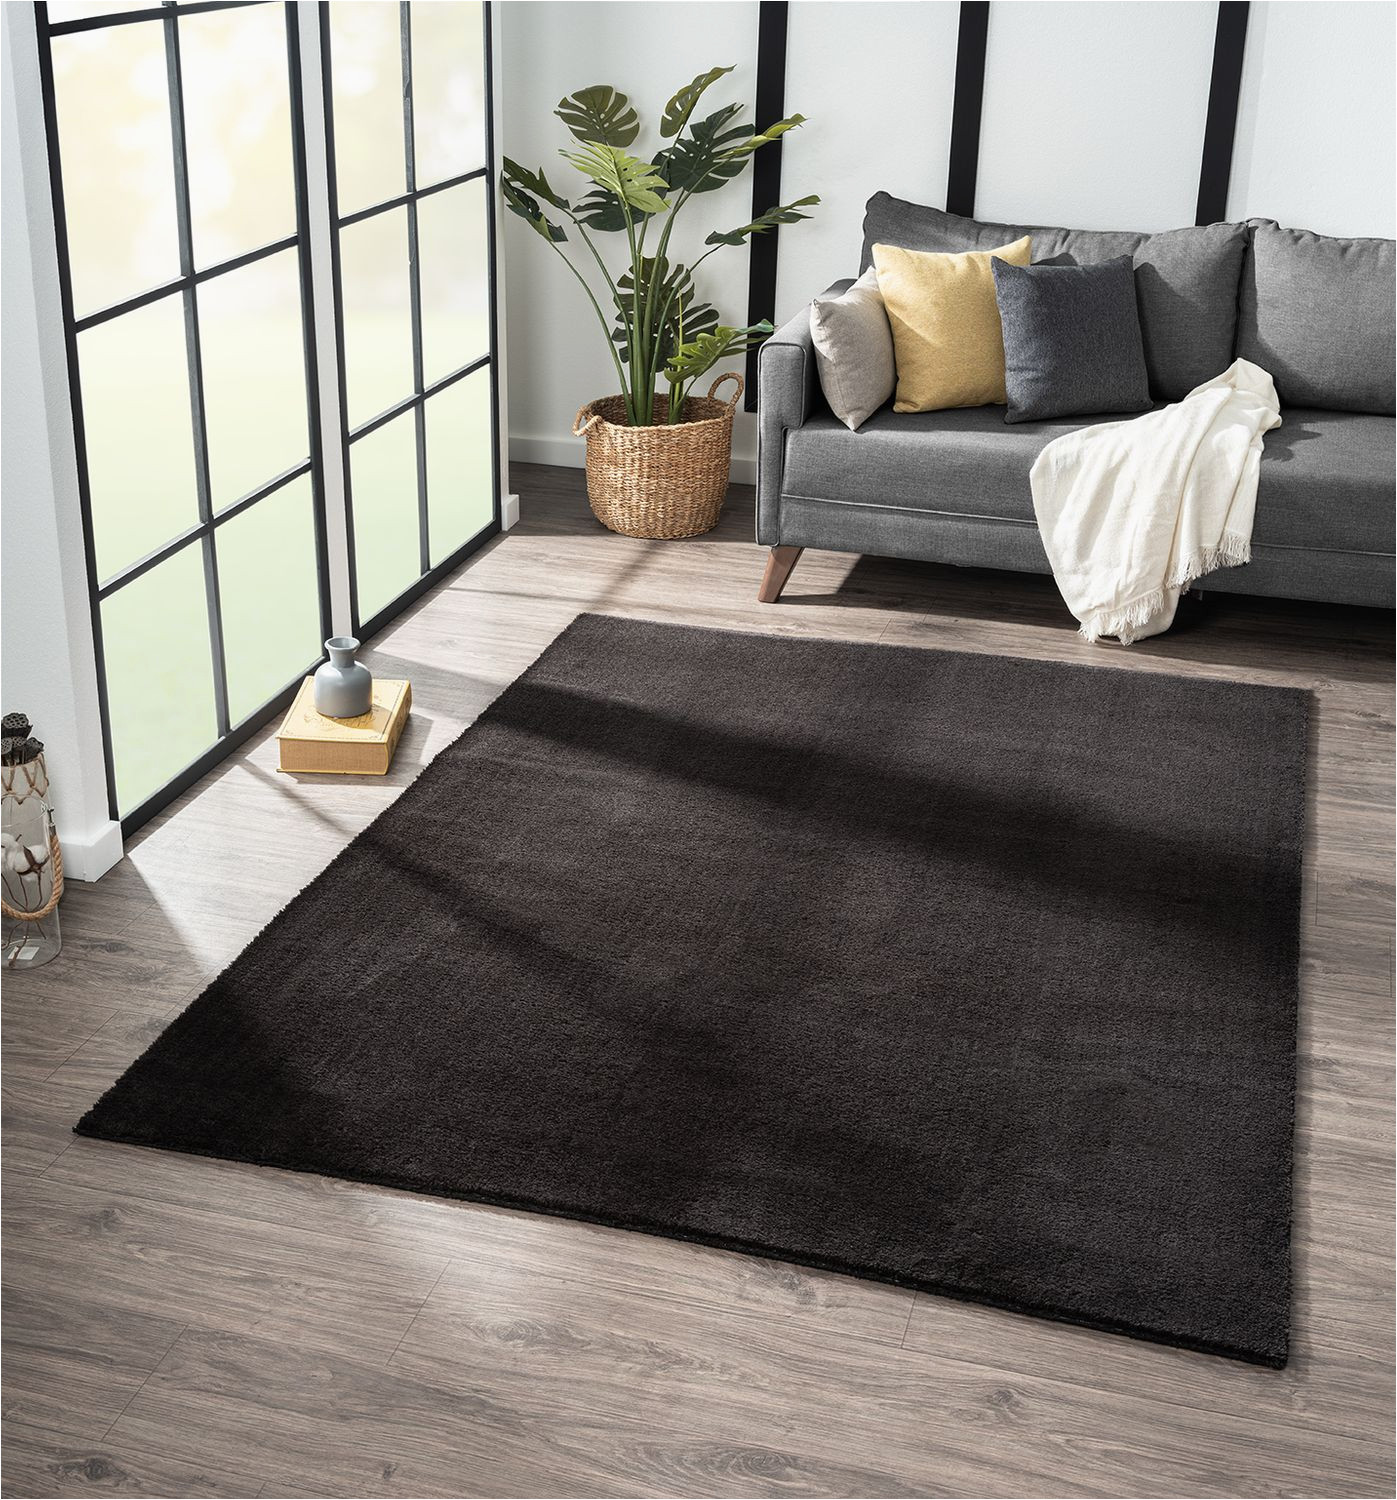 Area Rug On Carpet Living Room Prime Shaggy Rug High-pile Rug Carpet Livingroom Bedroom Rug Trendy Rugs and Carpets Available In Grey Nugat Anthracite Red Brown Beige Copper Purple …